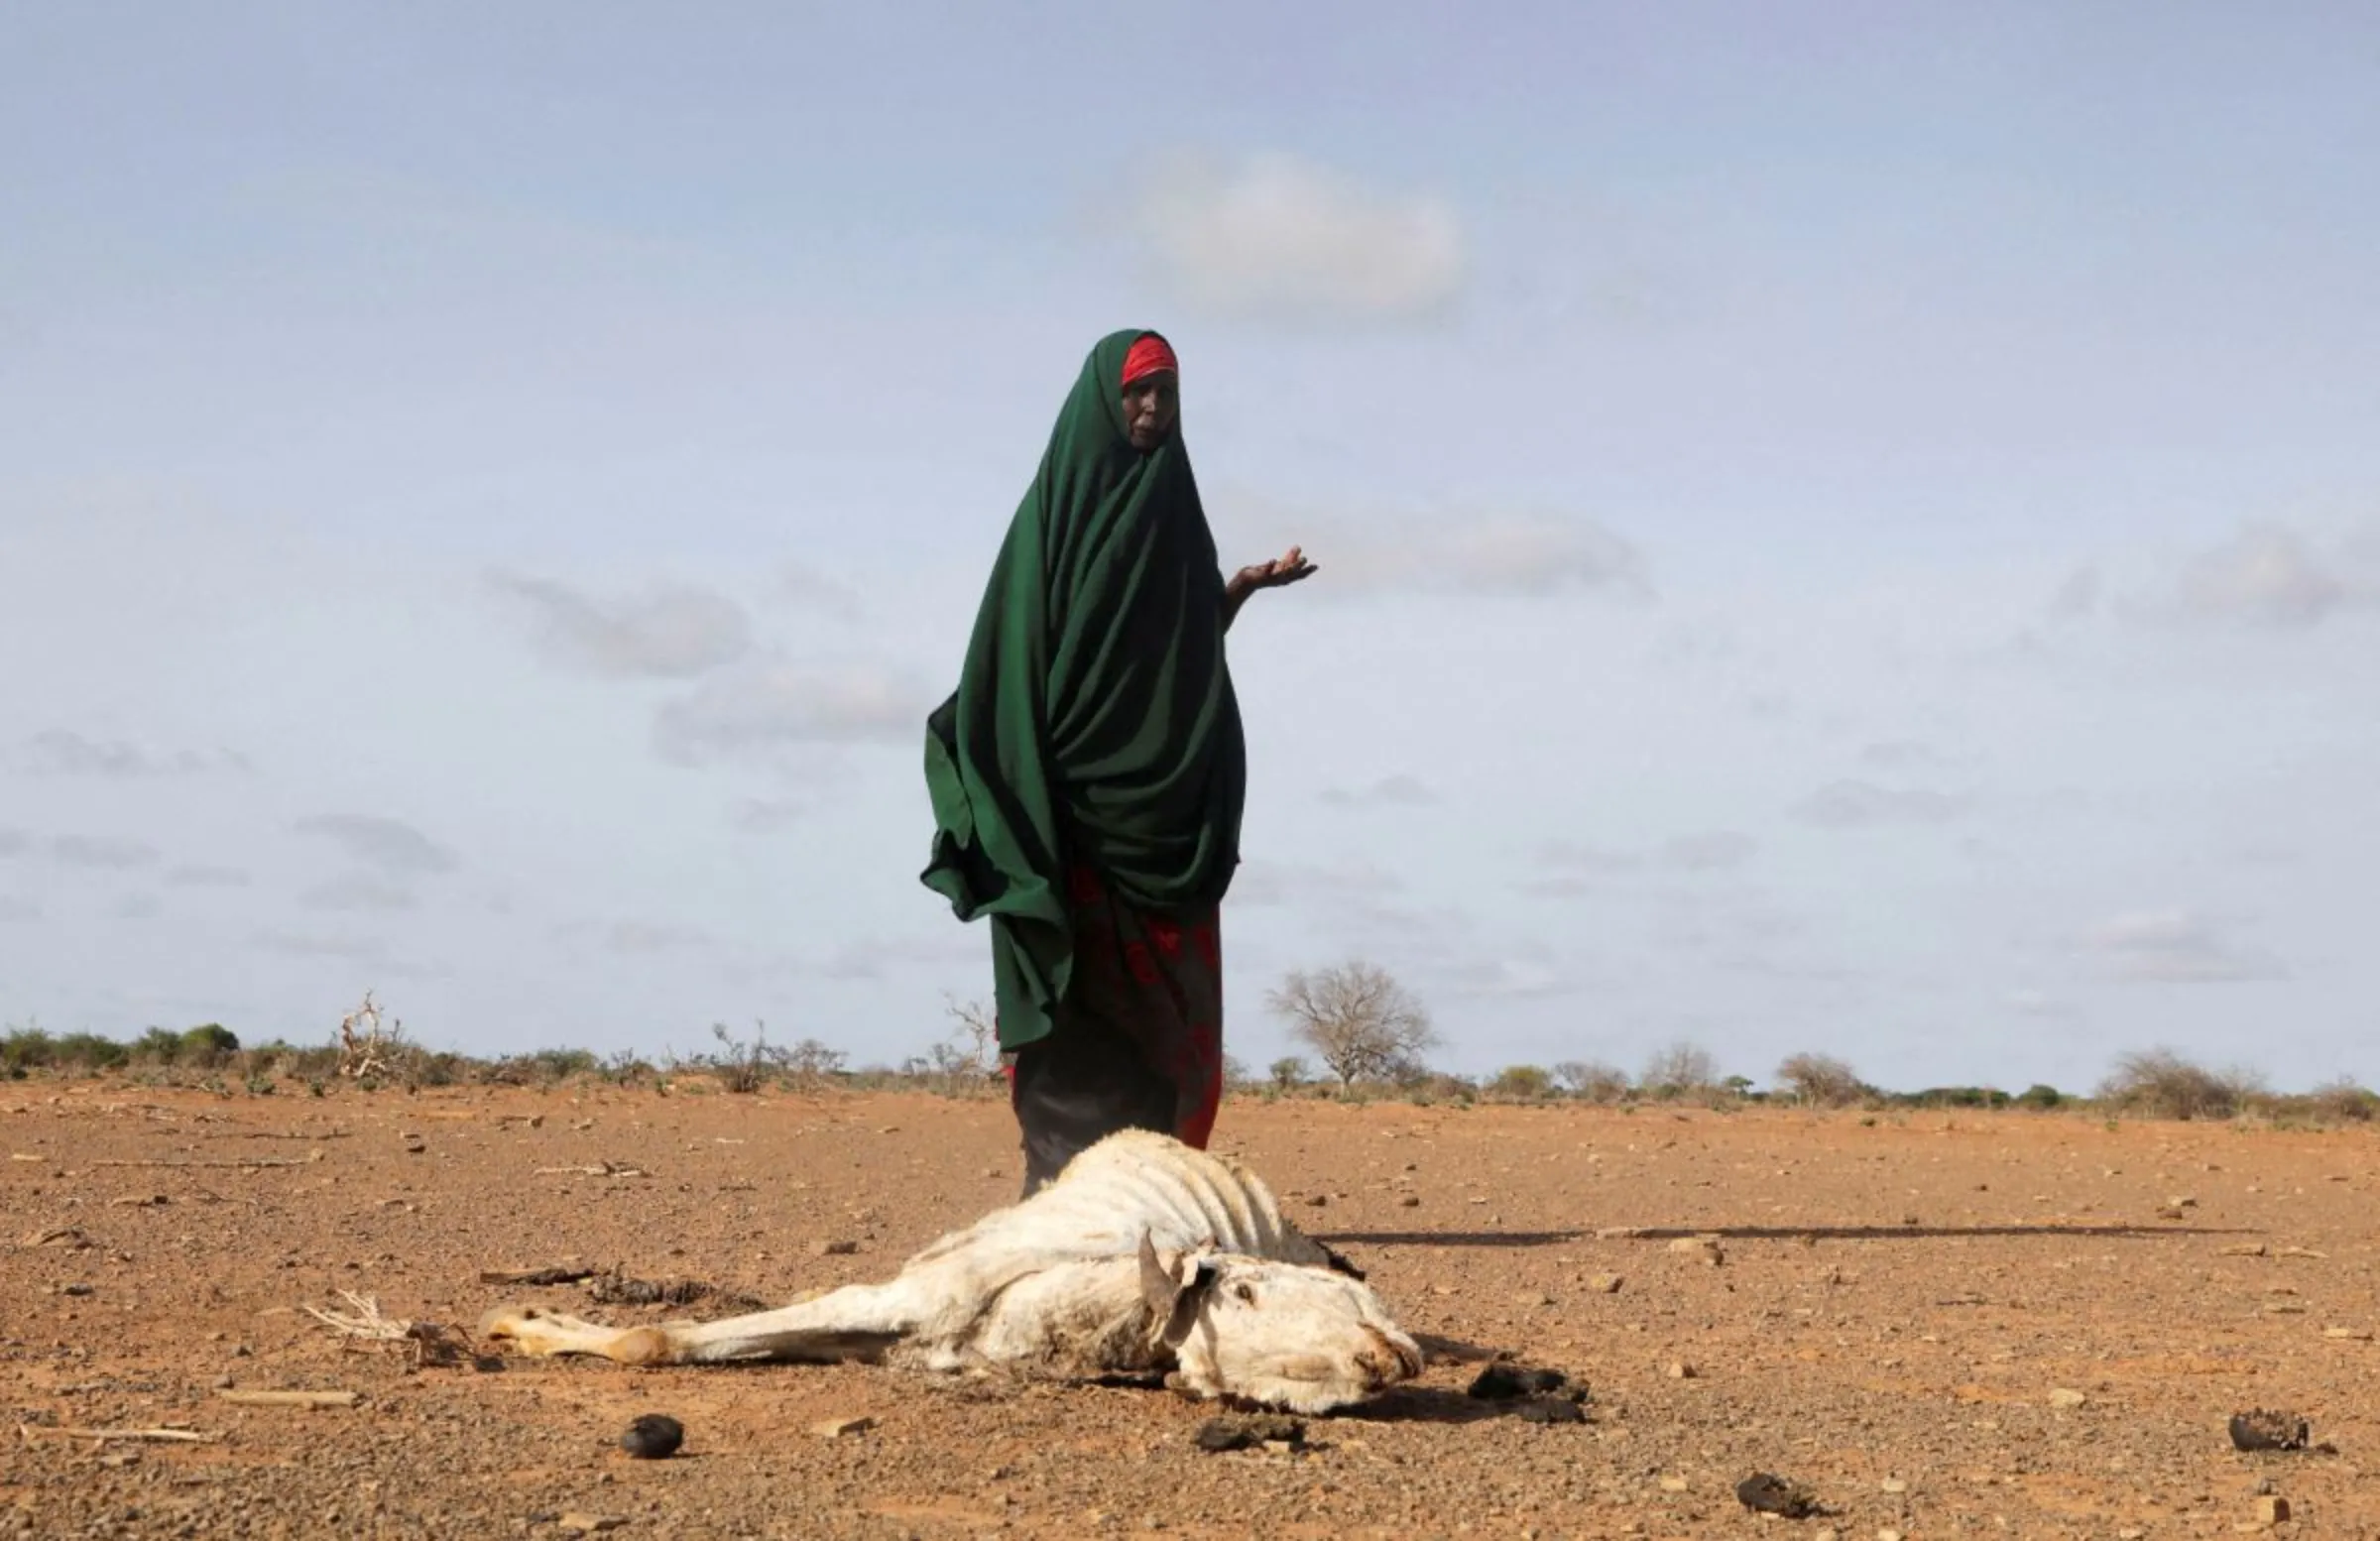 Internally displaced Somali woman Habiba Bile stands near the carcass of her dead livestock following severe droughts near Dollow, Gedo Region, Somalia, May 26, 2022. REUTERS/Feisal Omar